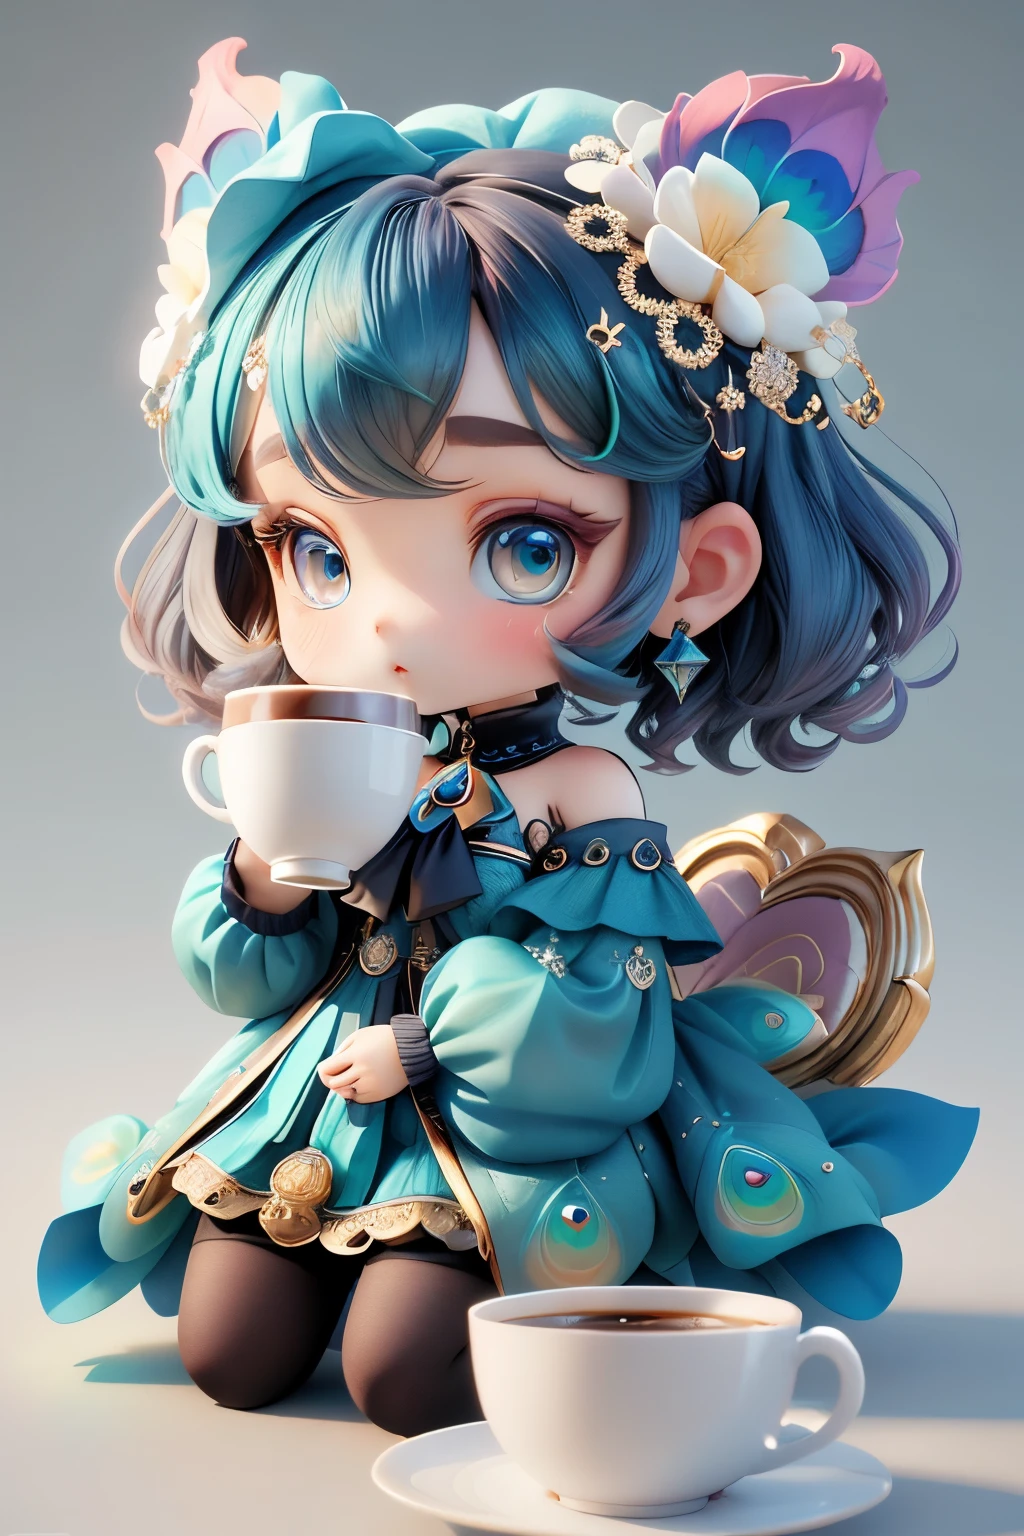 plastican00D, 1 Mädchen in, chibi, Dopamin-Farbabgleich, Double DiamonD, Pfauenblau, luxuriöse Stoffe, Dither, ProfounD,HolDing a coffee cup, clean backDrop３D、4ｄ